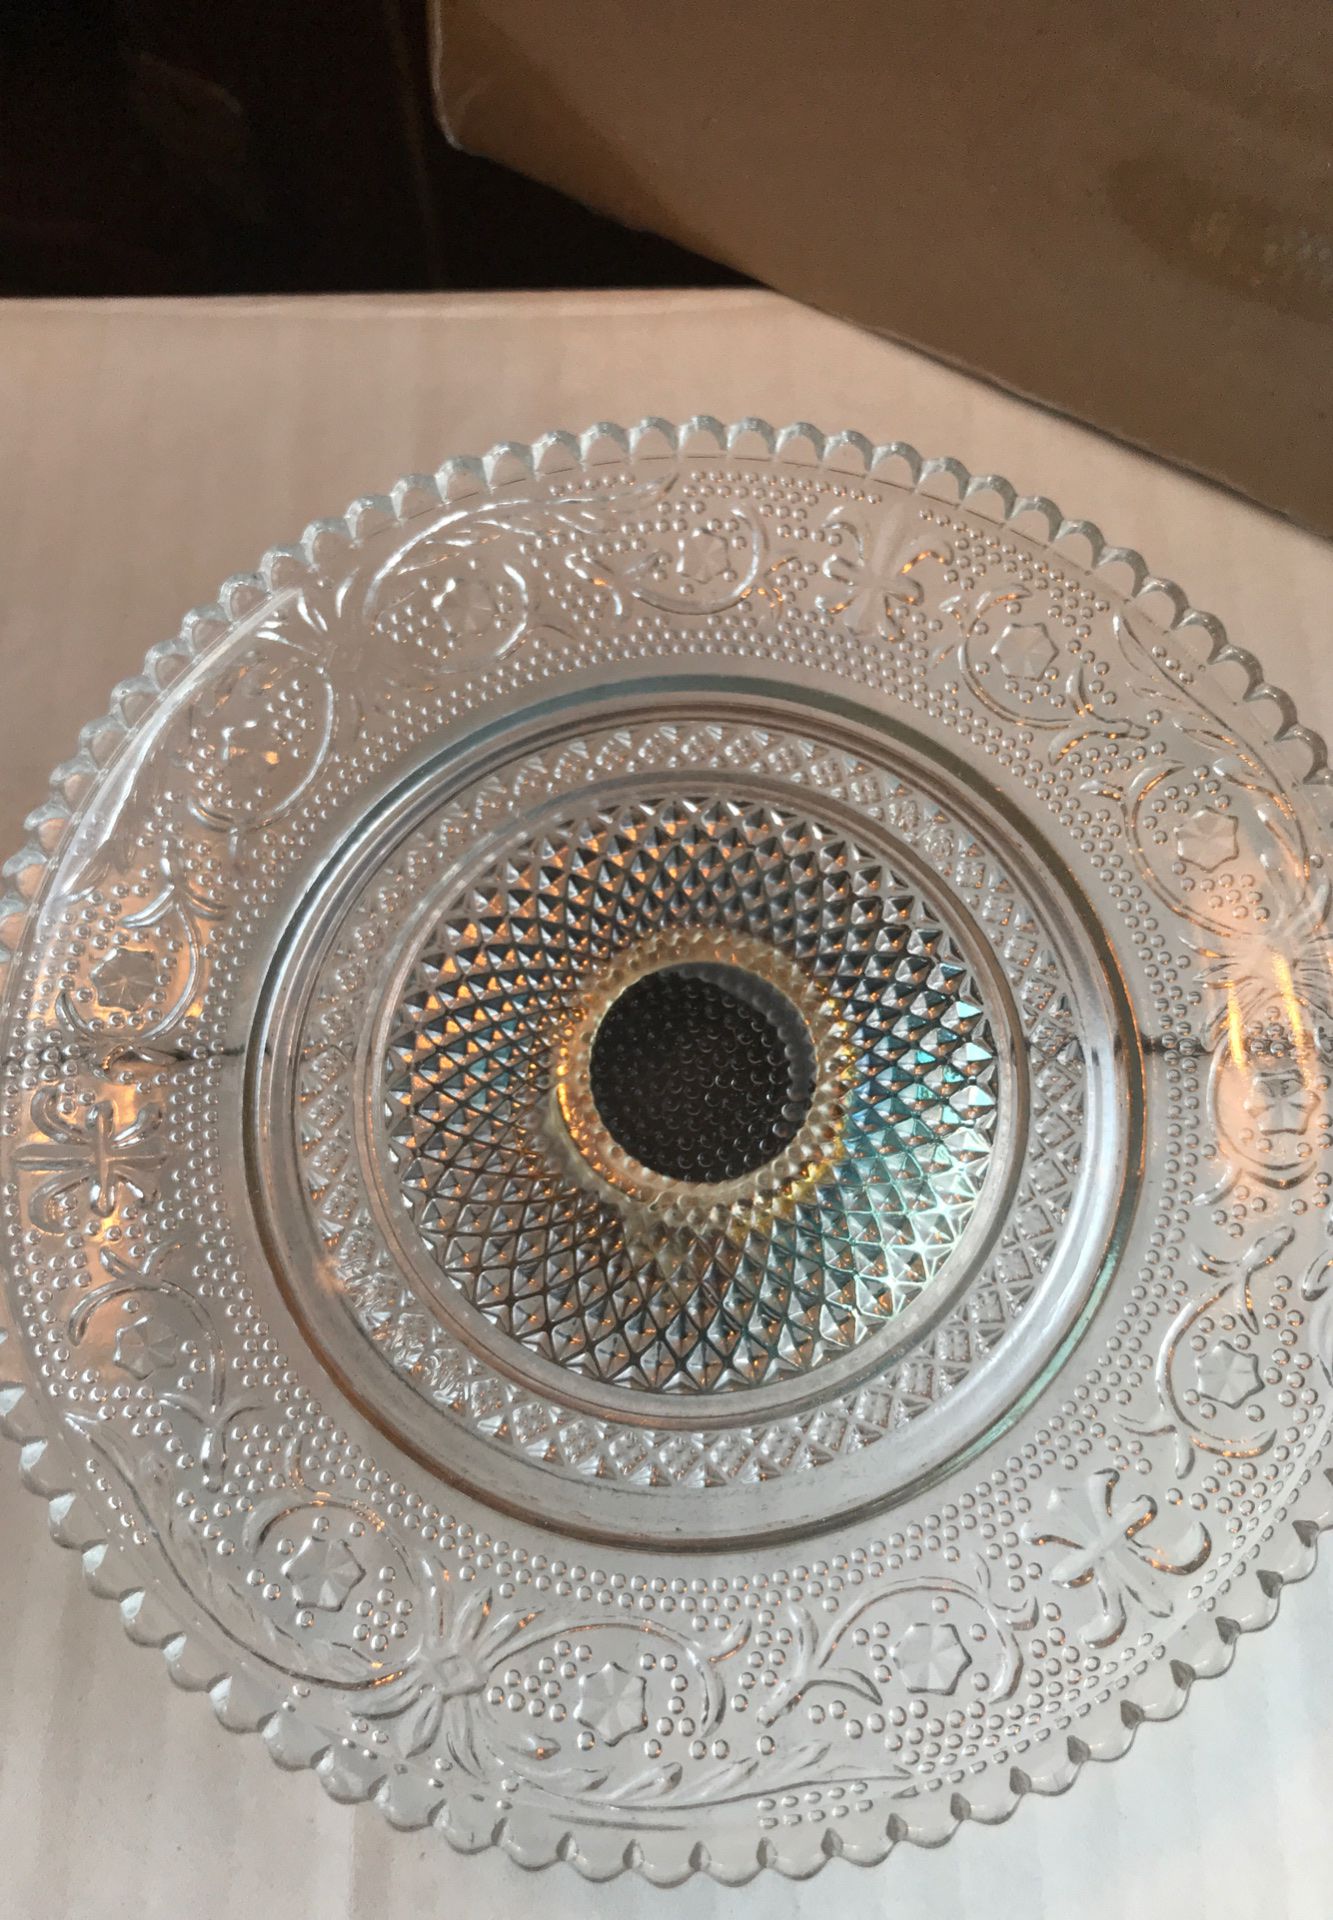 Crystal and Silverplated Pedestal Server Dish